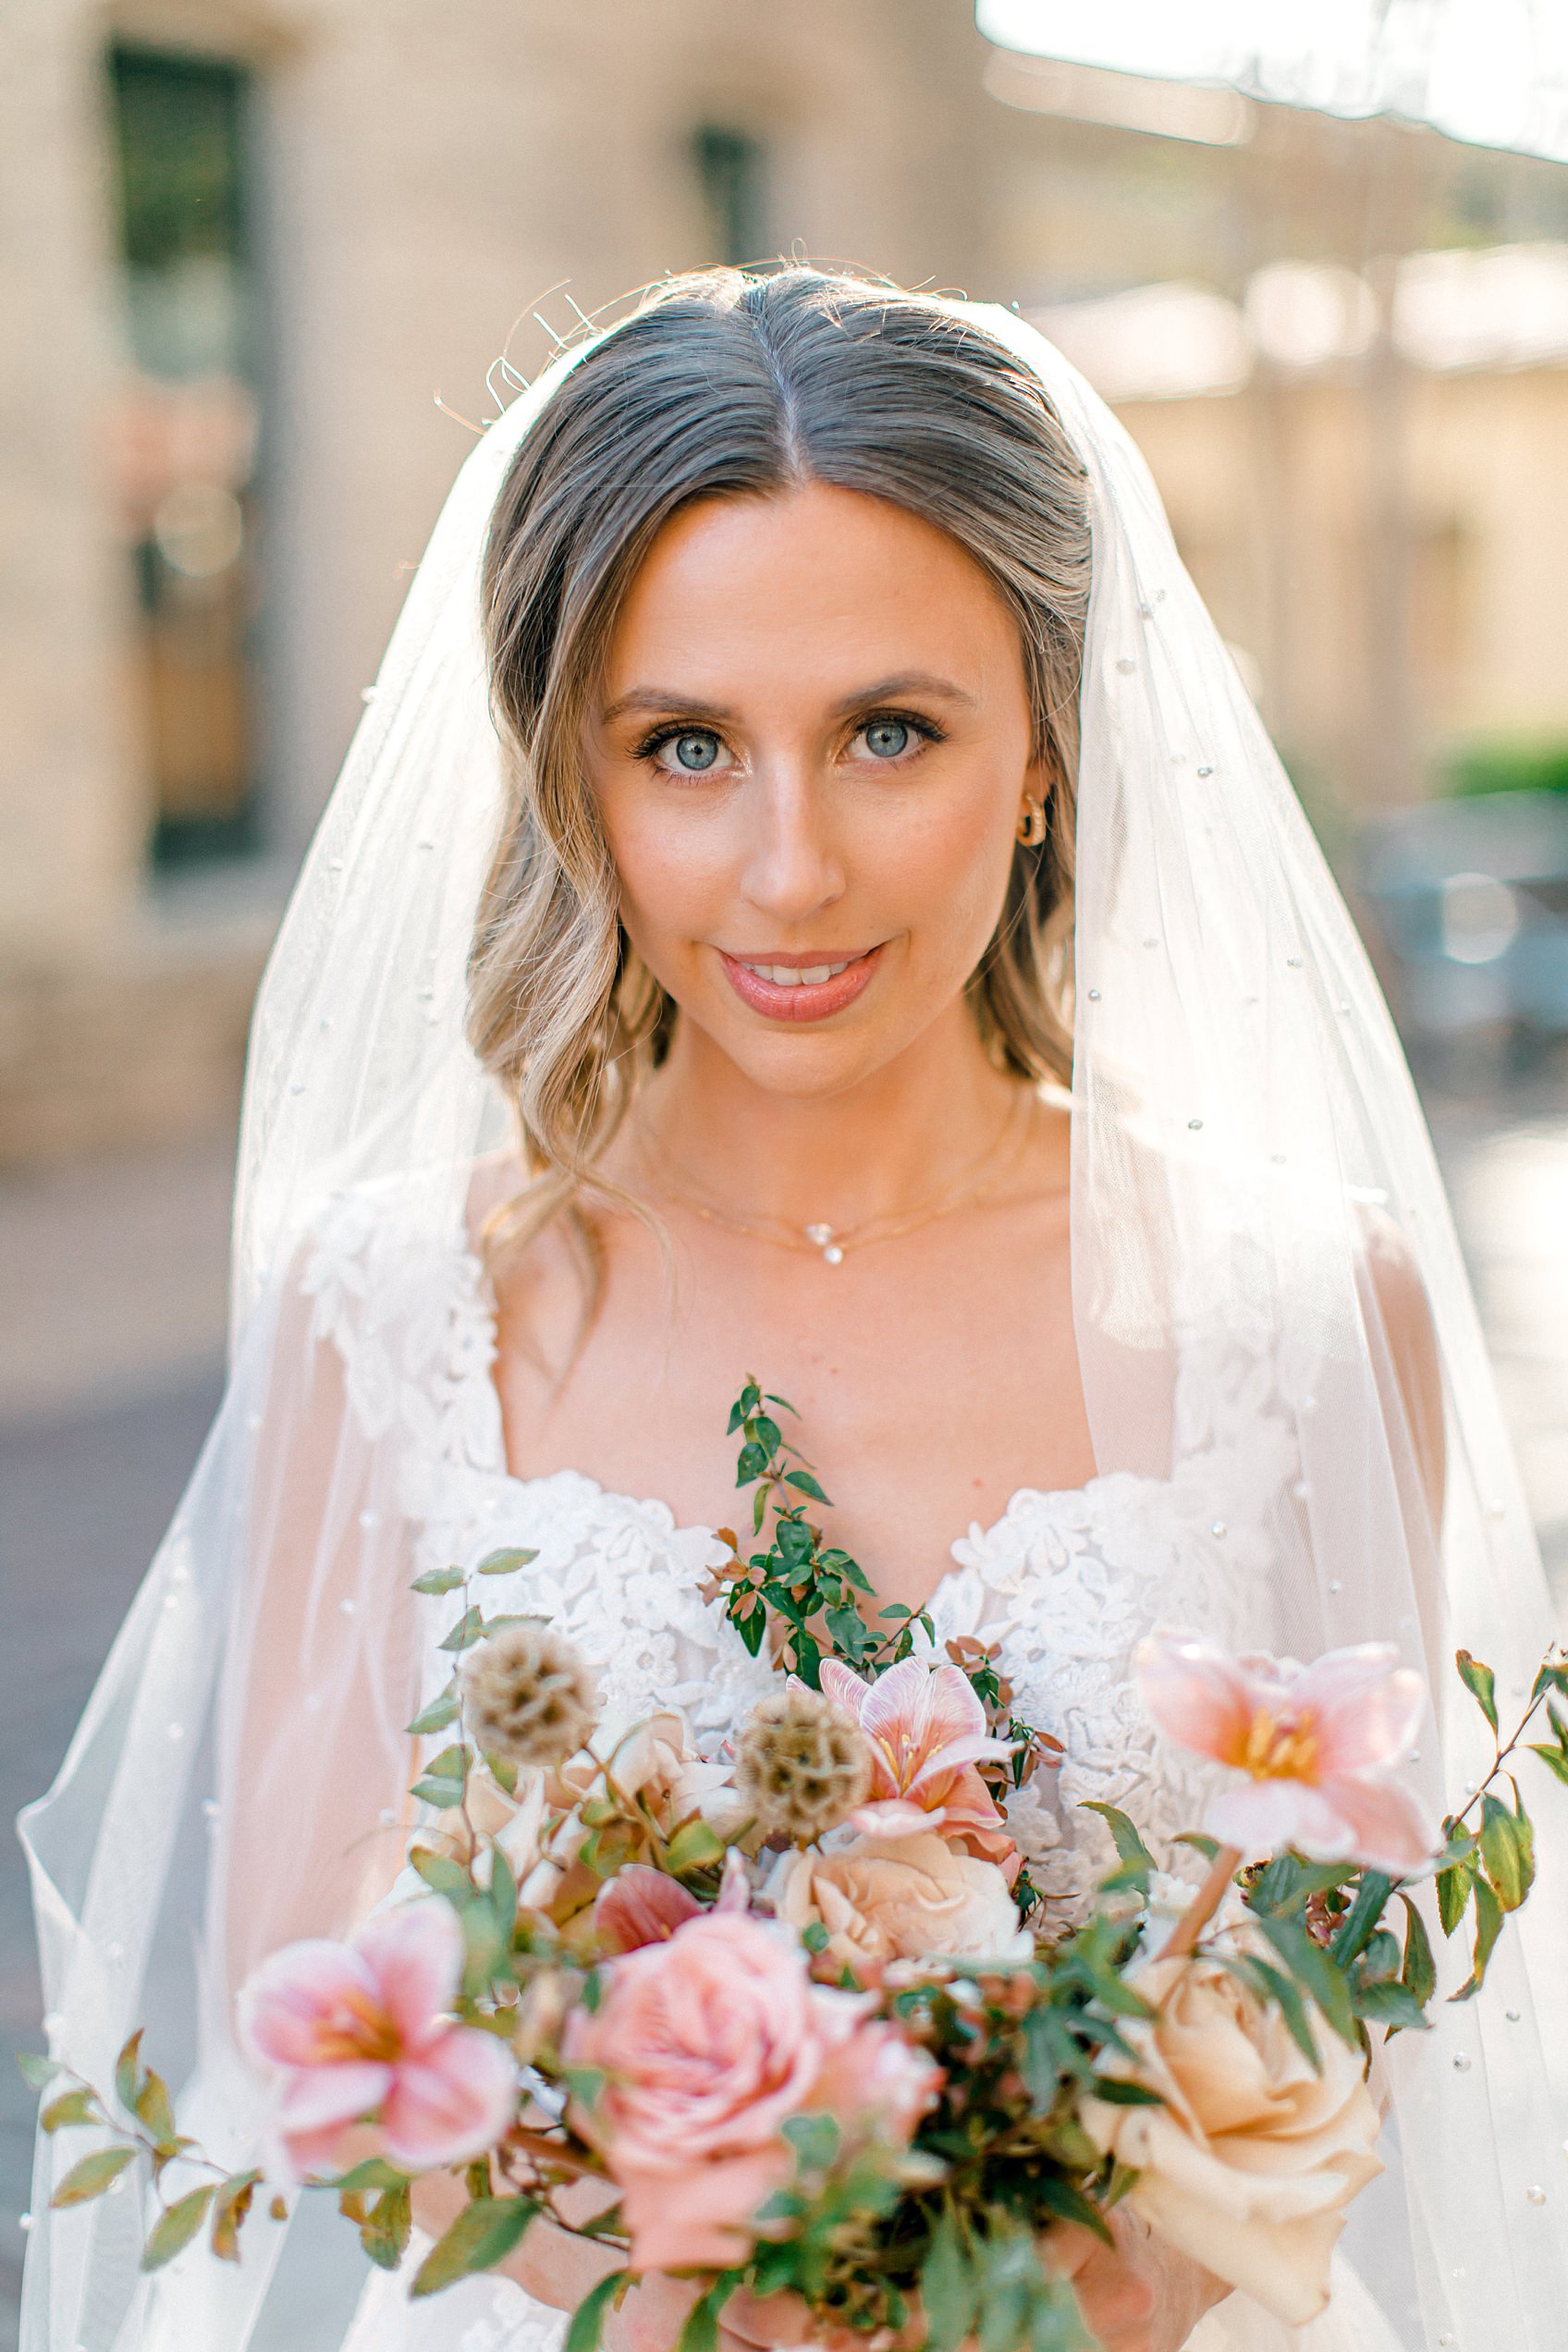 Downtown San Antonio Bridal Photography Session by Allison Jeffers Wedding Photography 0013